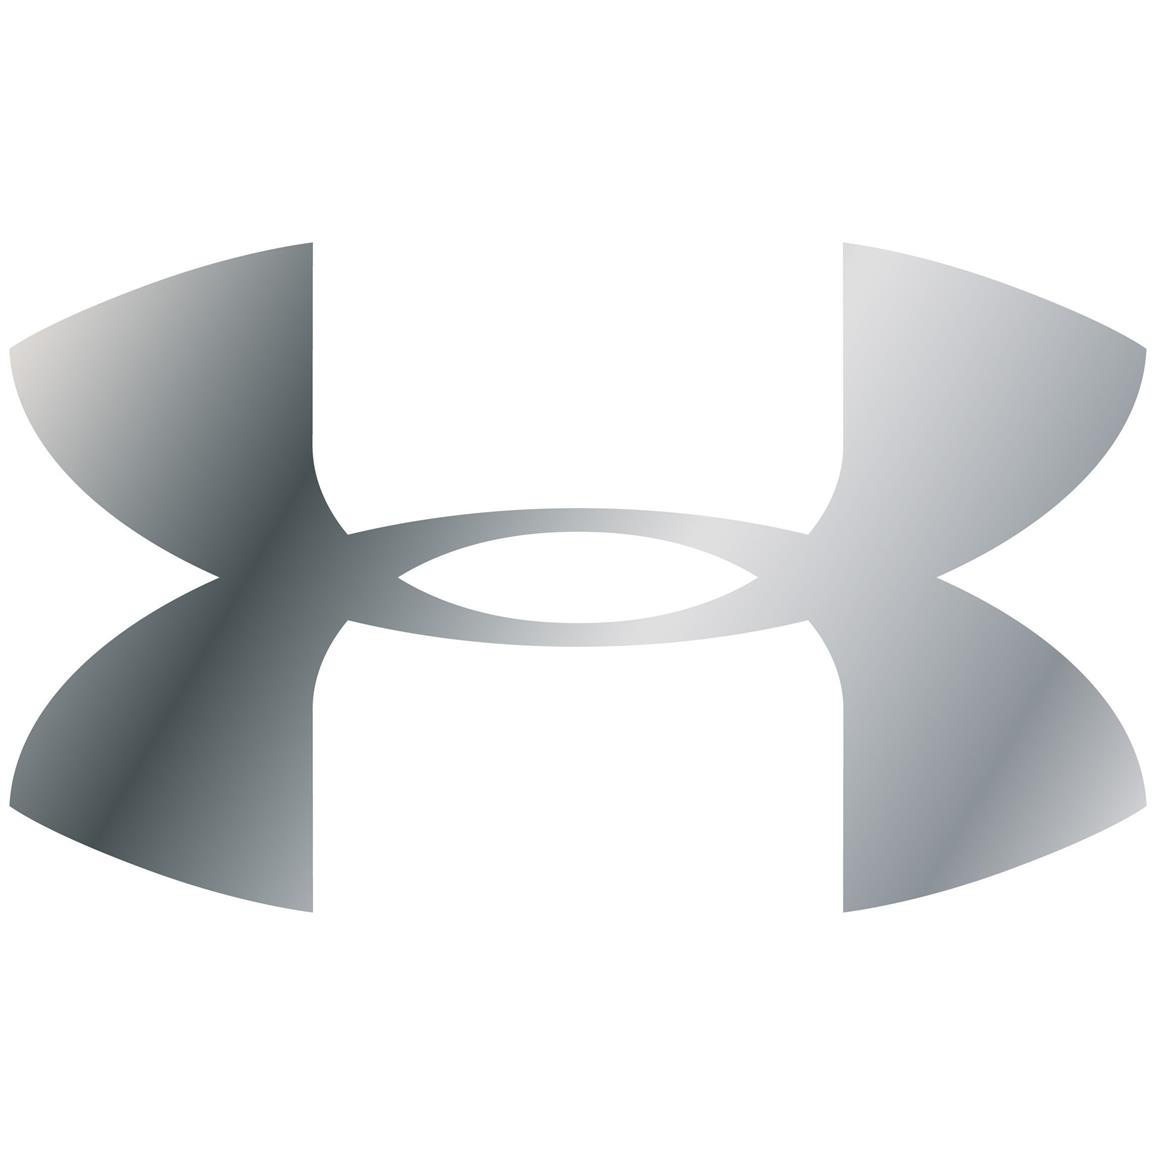 Under Armour® Emblem - 620886, Window Graphics at Sportsman's Guide